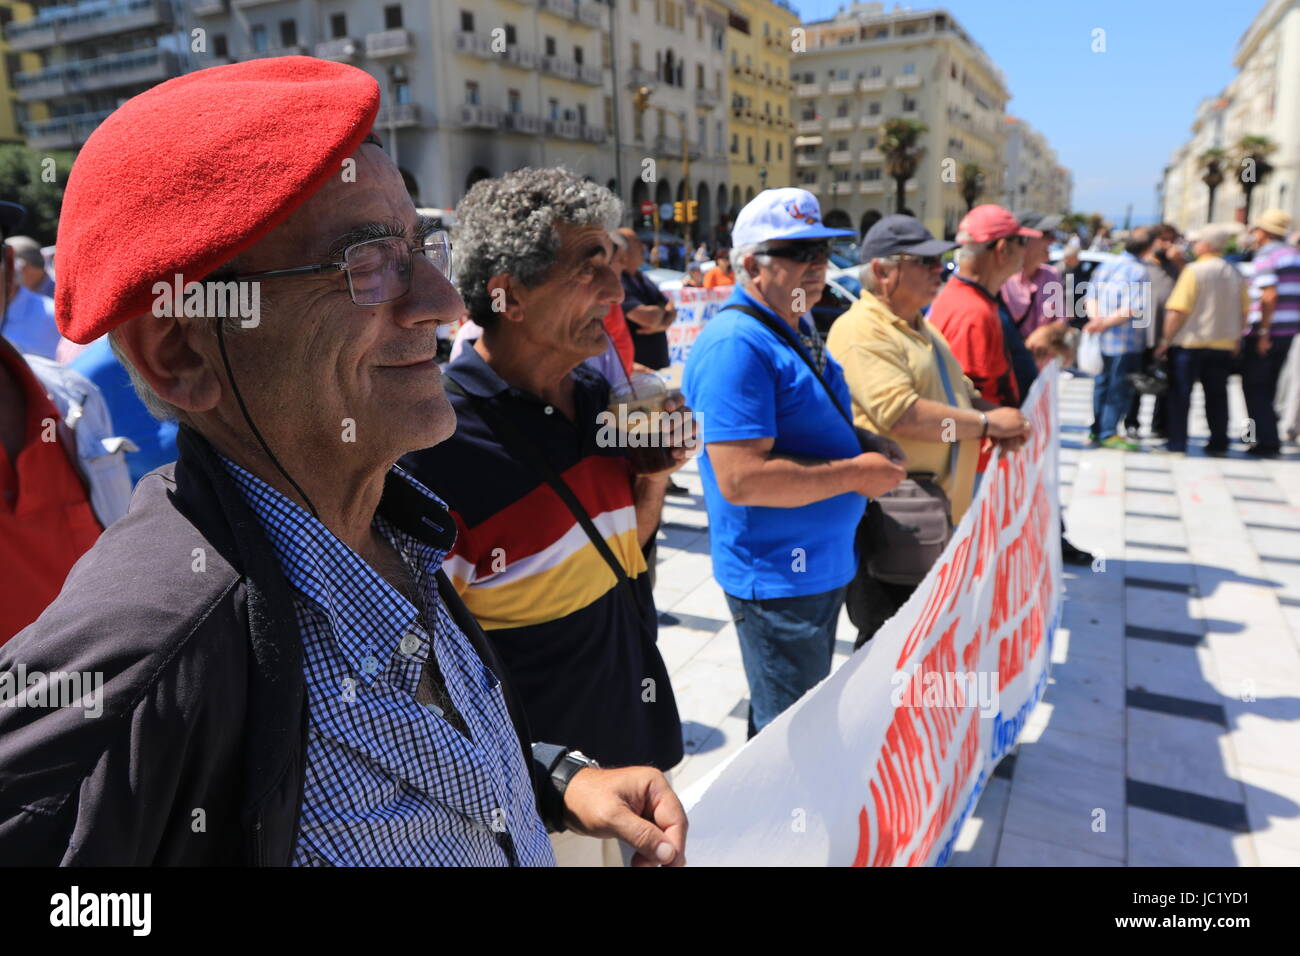 Thessaloniki, Greece, June 13th, 2017. Thousands of elderly Greeks took to the streets and protested against cuts to their pensions.  Many retirees in Greece have already seen their pensions cut several times.  Pension cuts and reforms has been a regular feature of Greece's austerity drives. Credit : Orhan Tsolak / Alamy Live News Stock Photo